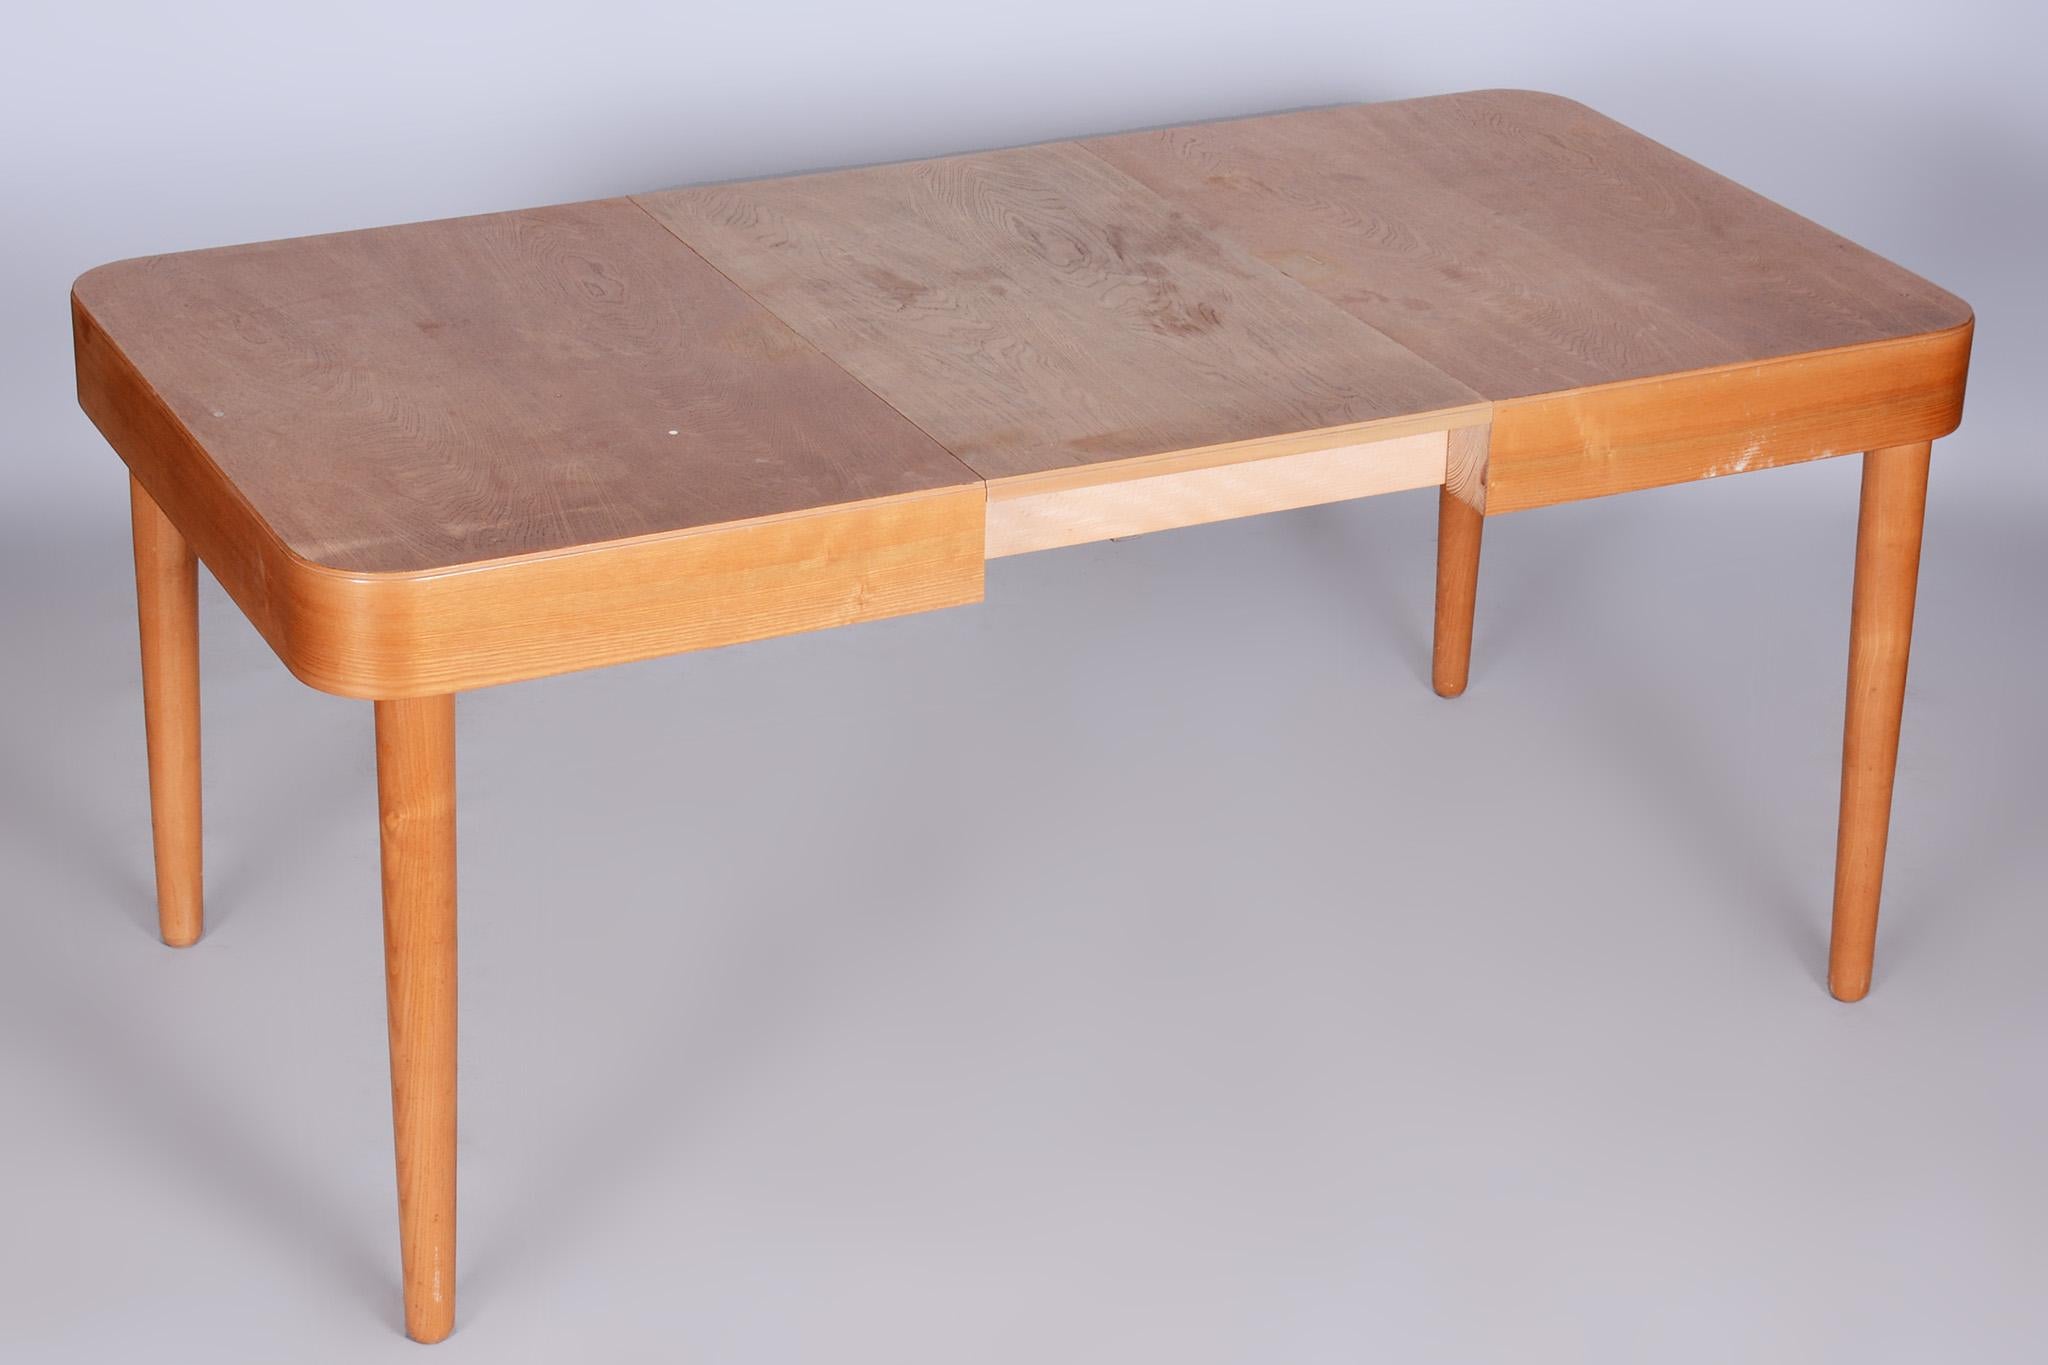 Mid-20th Century Midcentury Ash Dining Table, Made by Uluv, Revived Polish, Czechia, 1950s For Sale